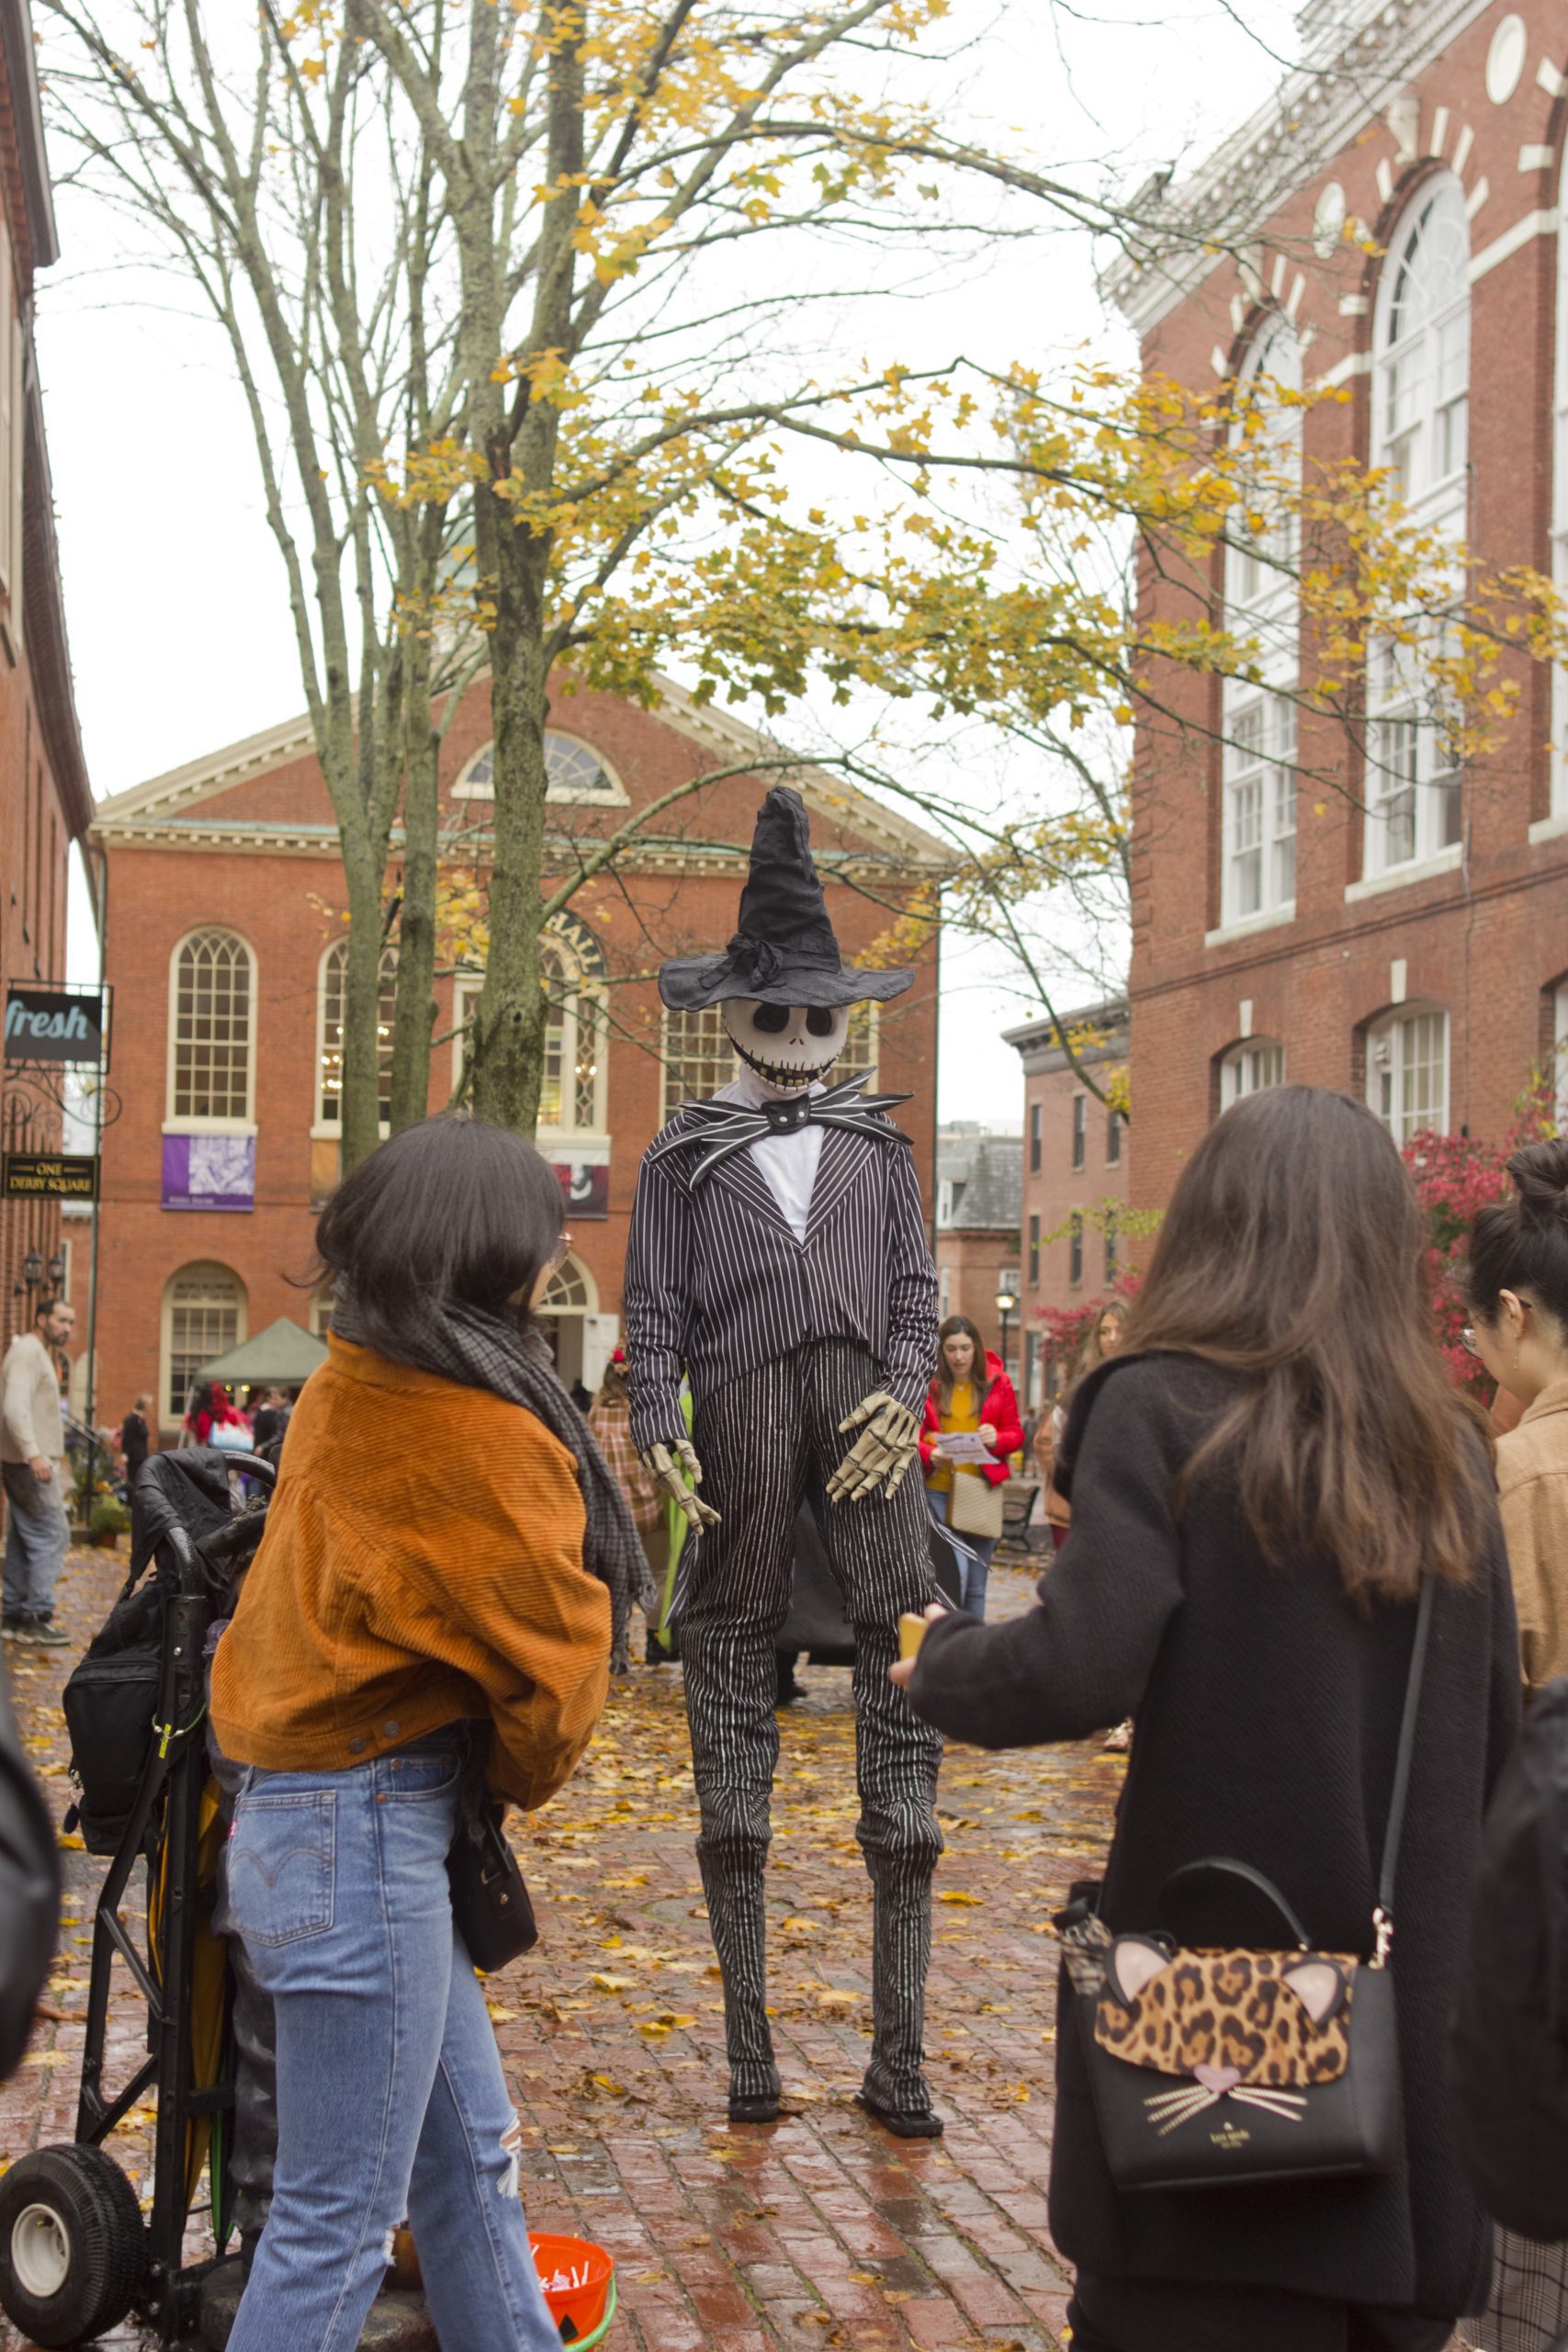 things to do in salem, haunted happenings grand parade salem ma october 2022